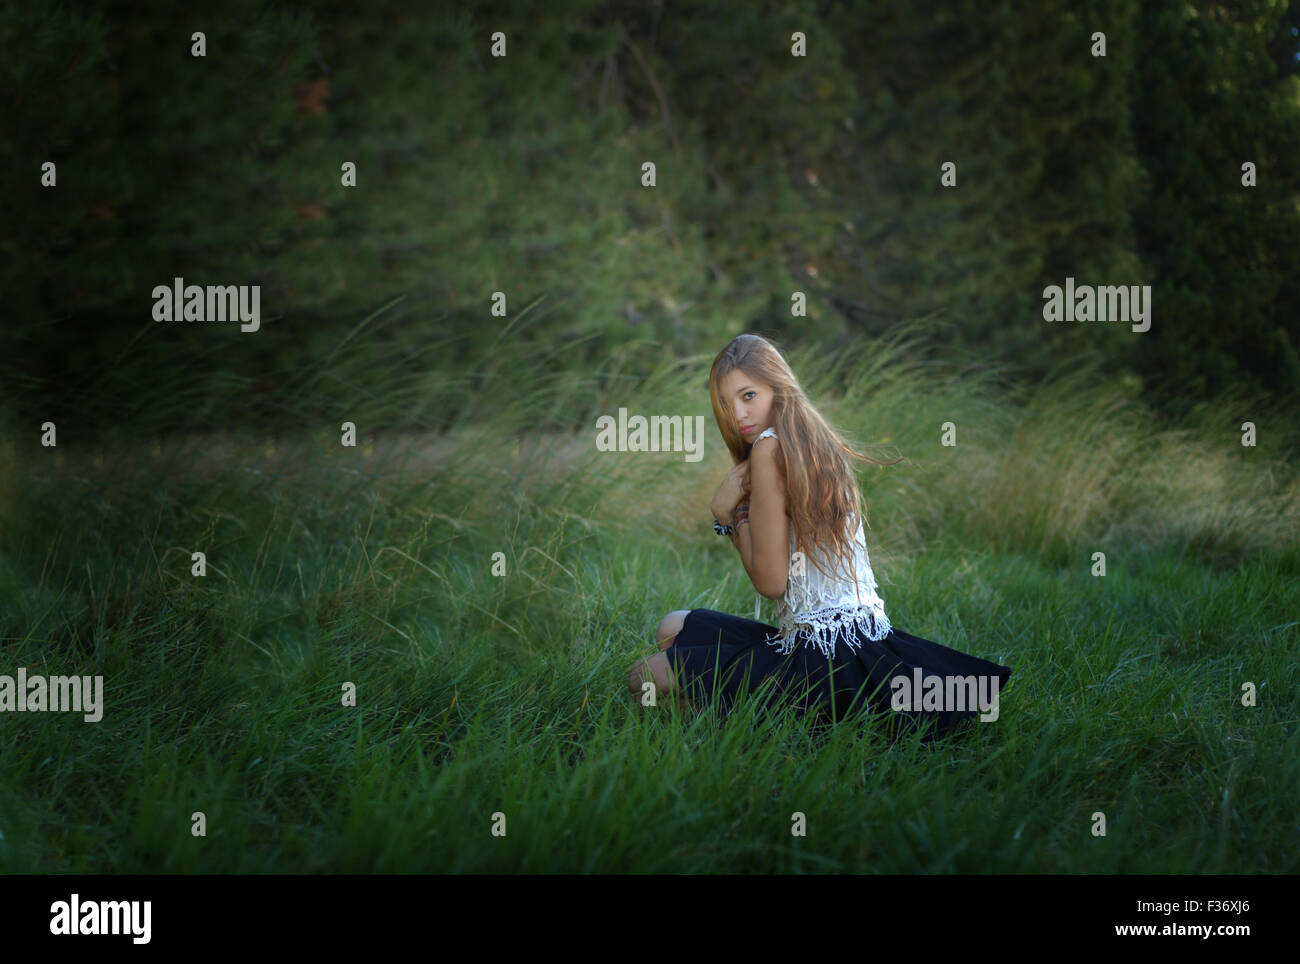 mysterious girl with long hair in the forest green grass Stock Photo